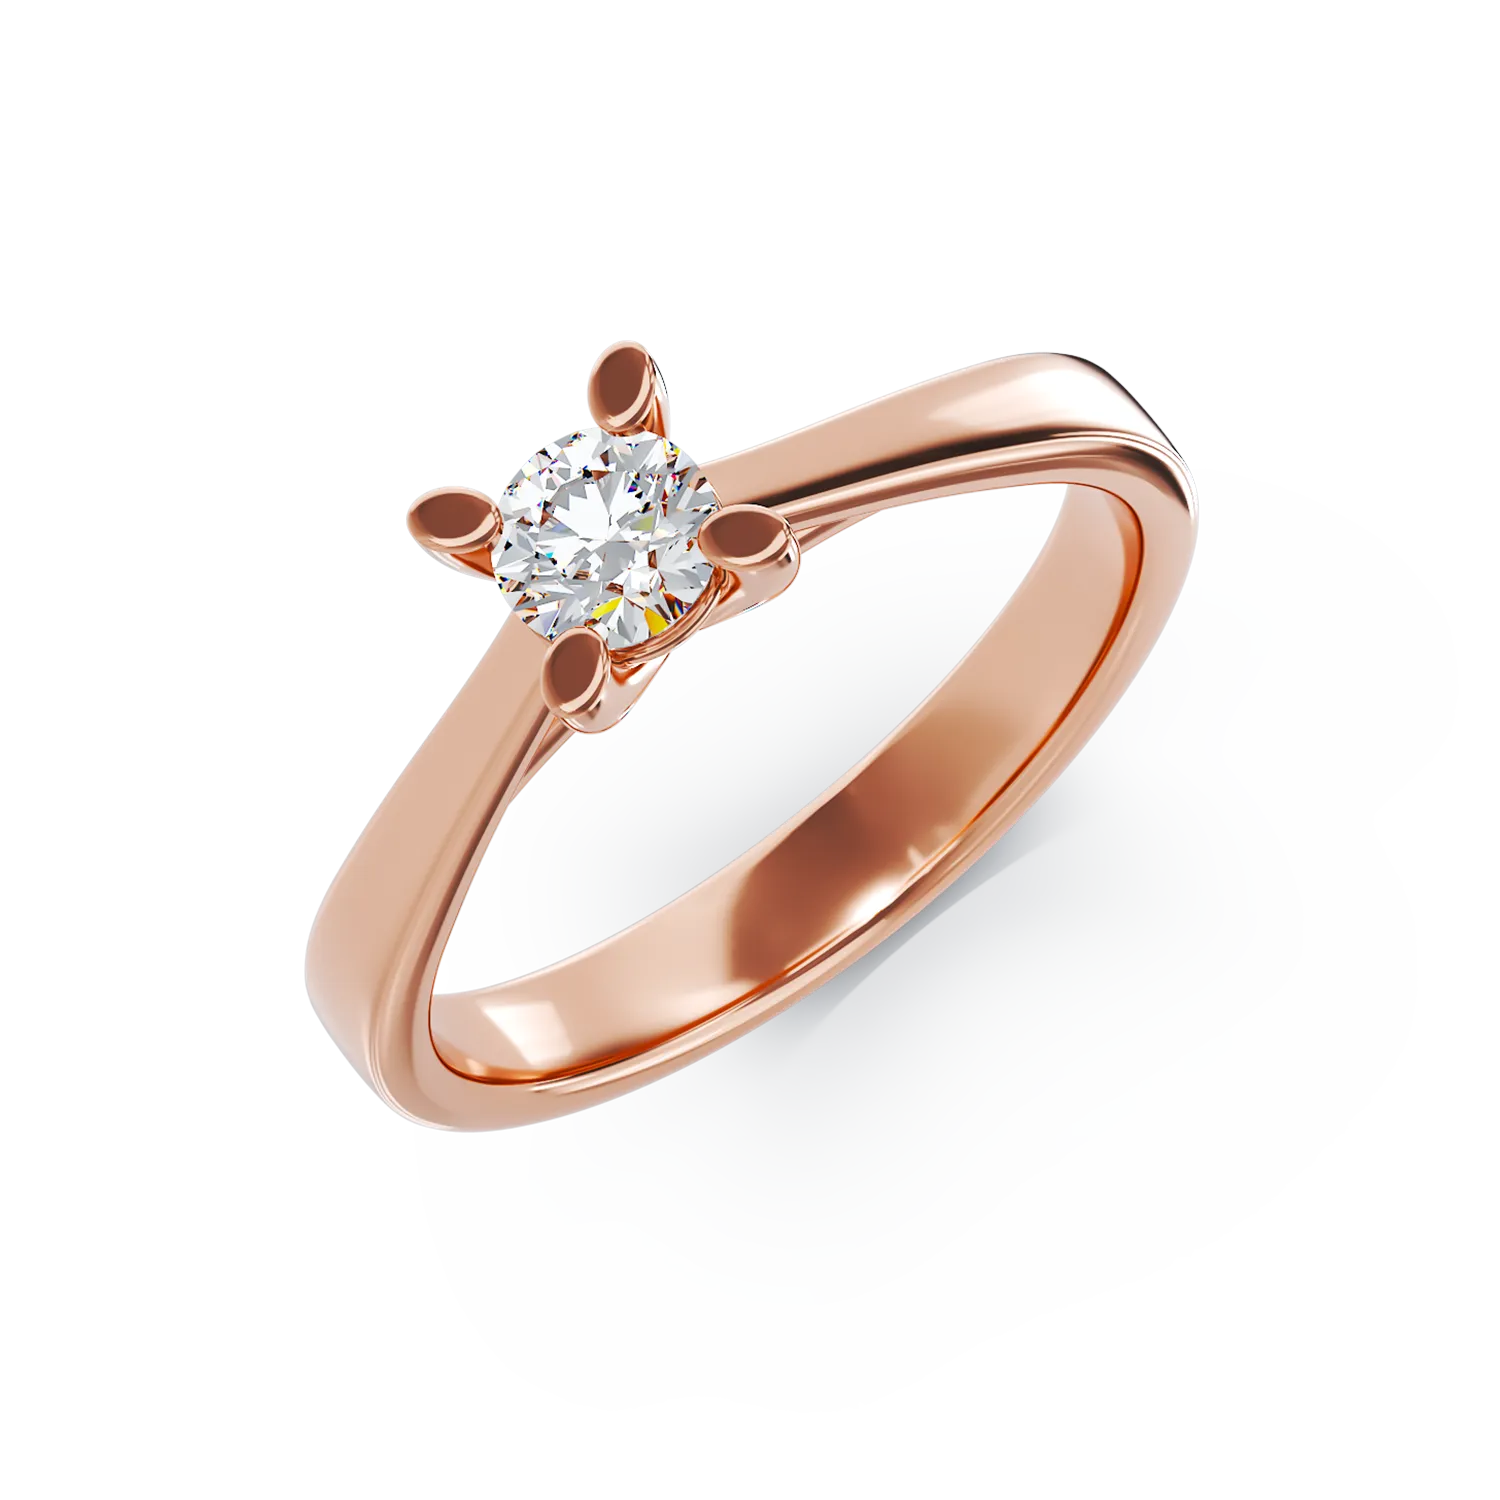 14K rose gold engagement ring with a 0.15ct solitaire diamond